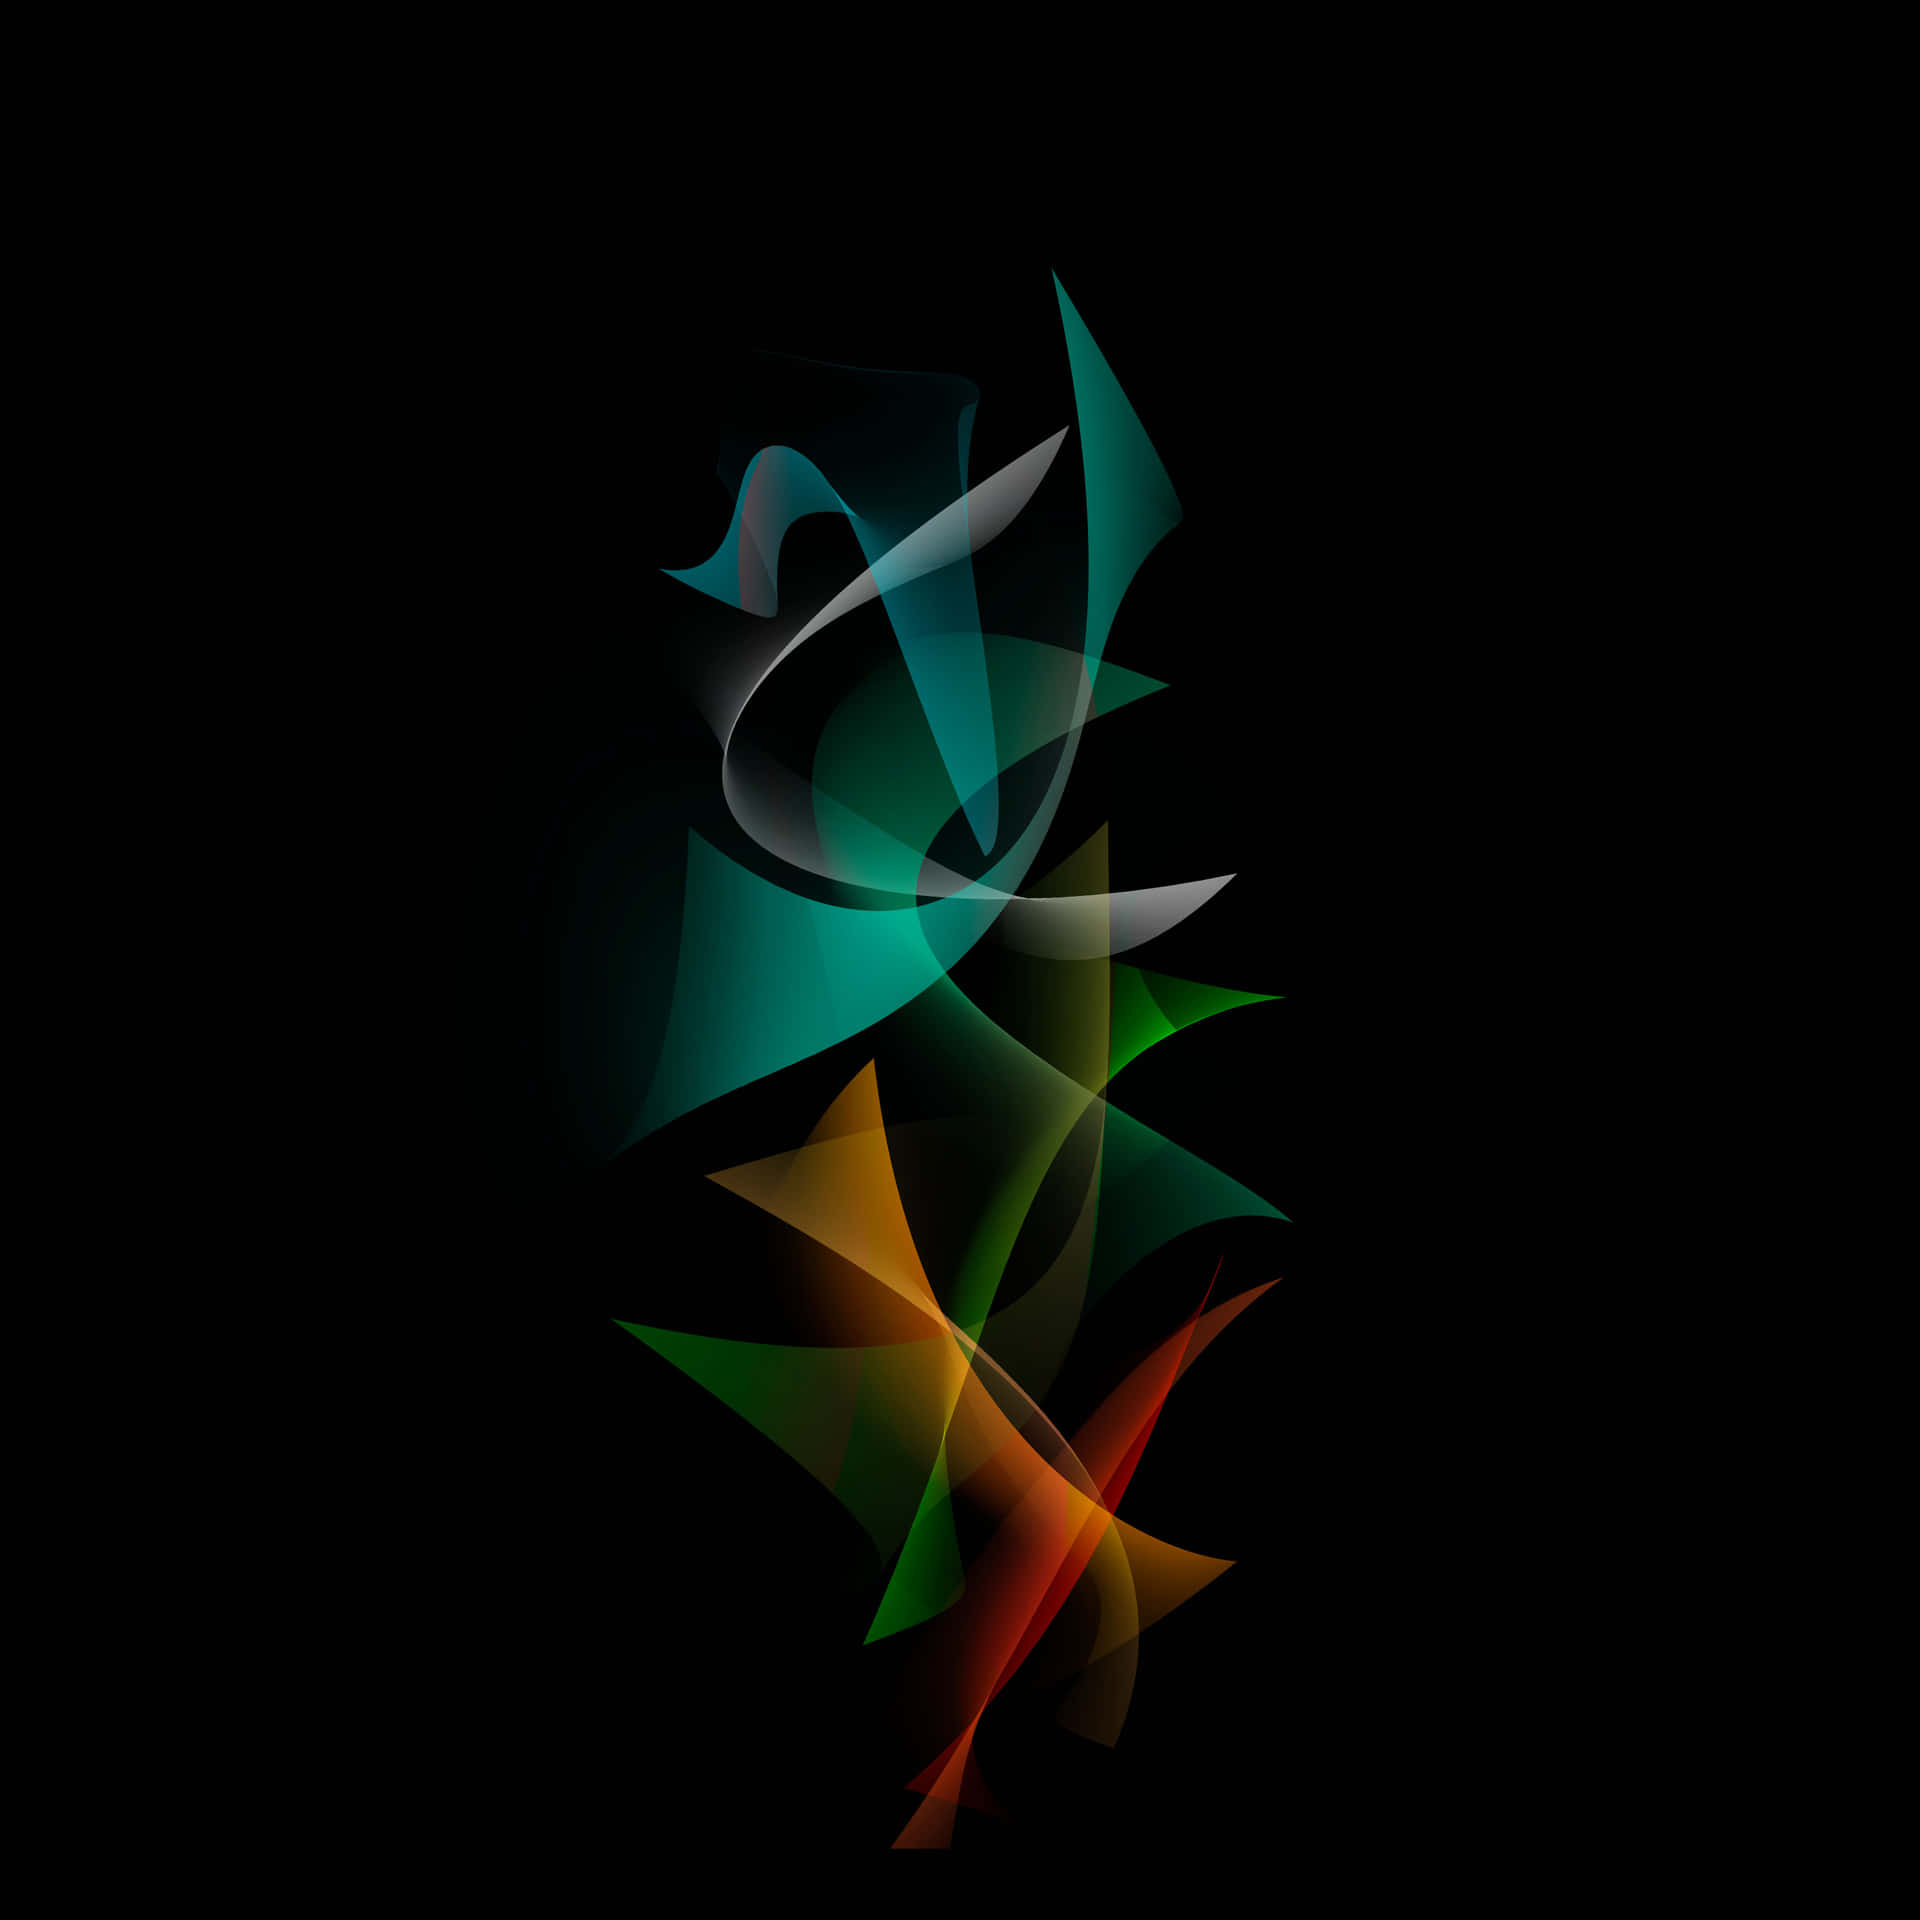 Colorful Abstract Art Pattern On Black Background